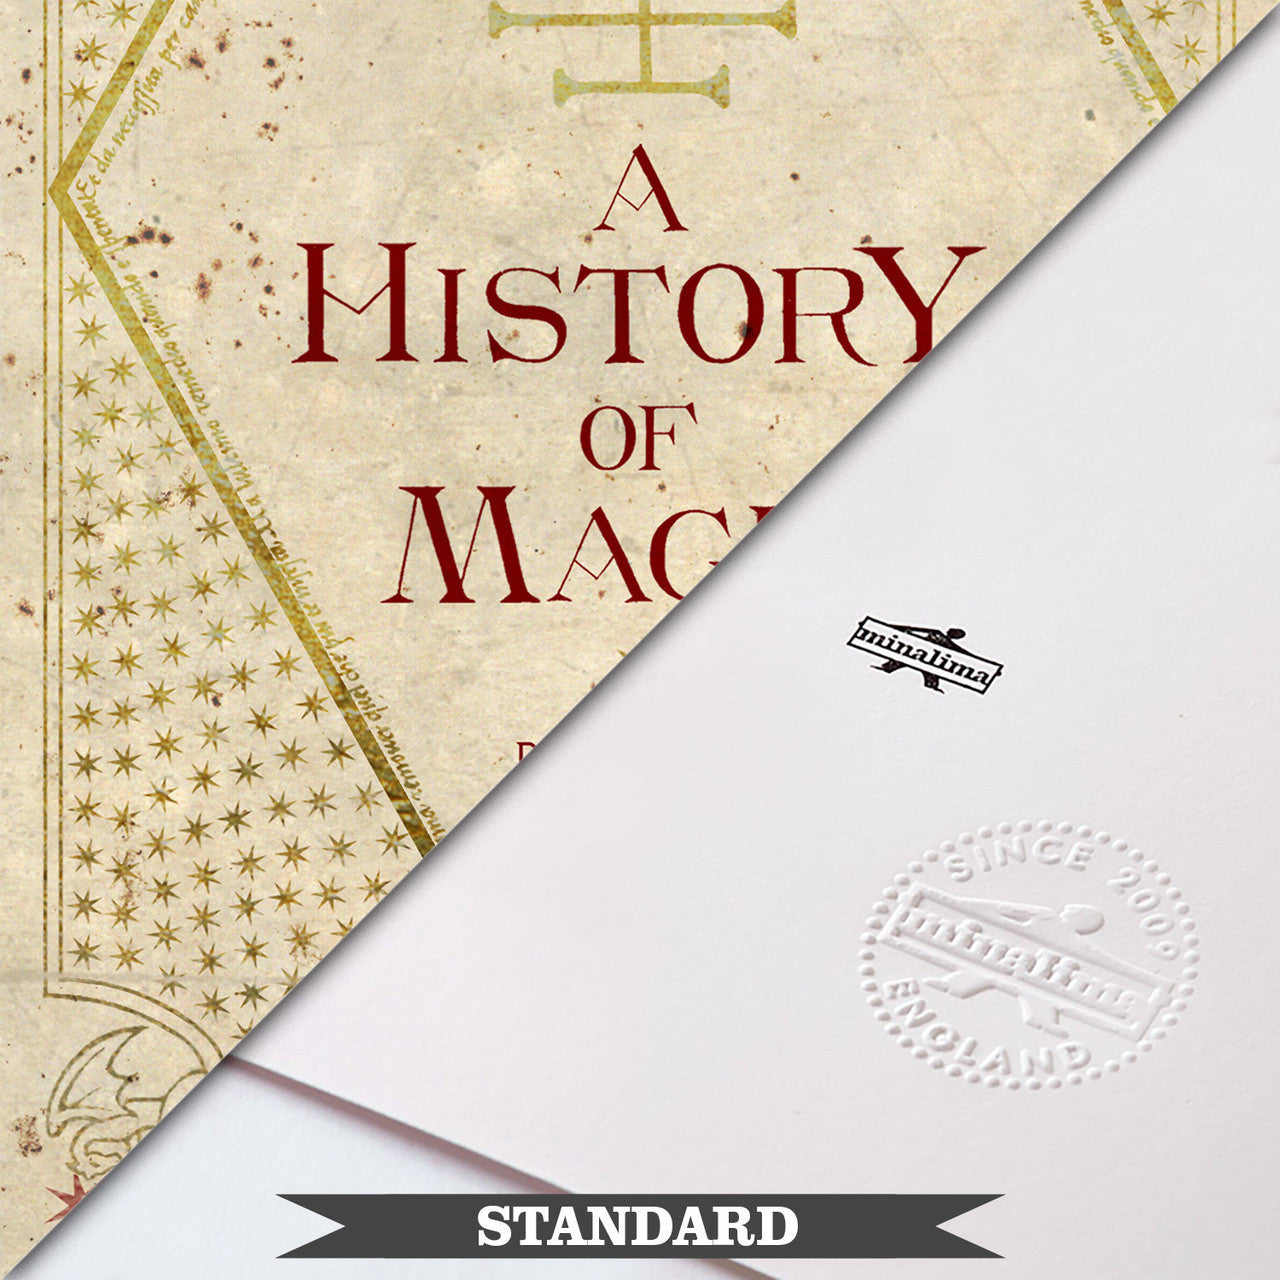 A History of Magic Limited Edition Art Print